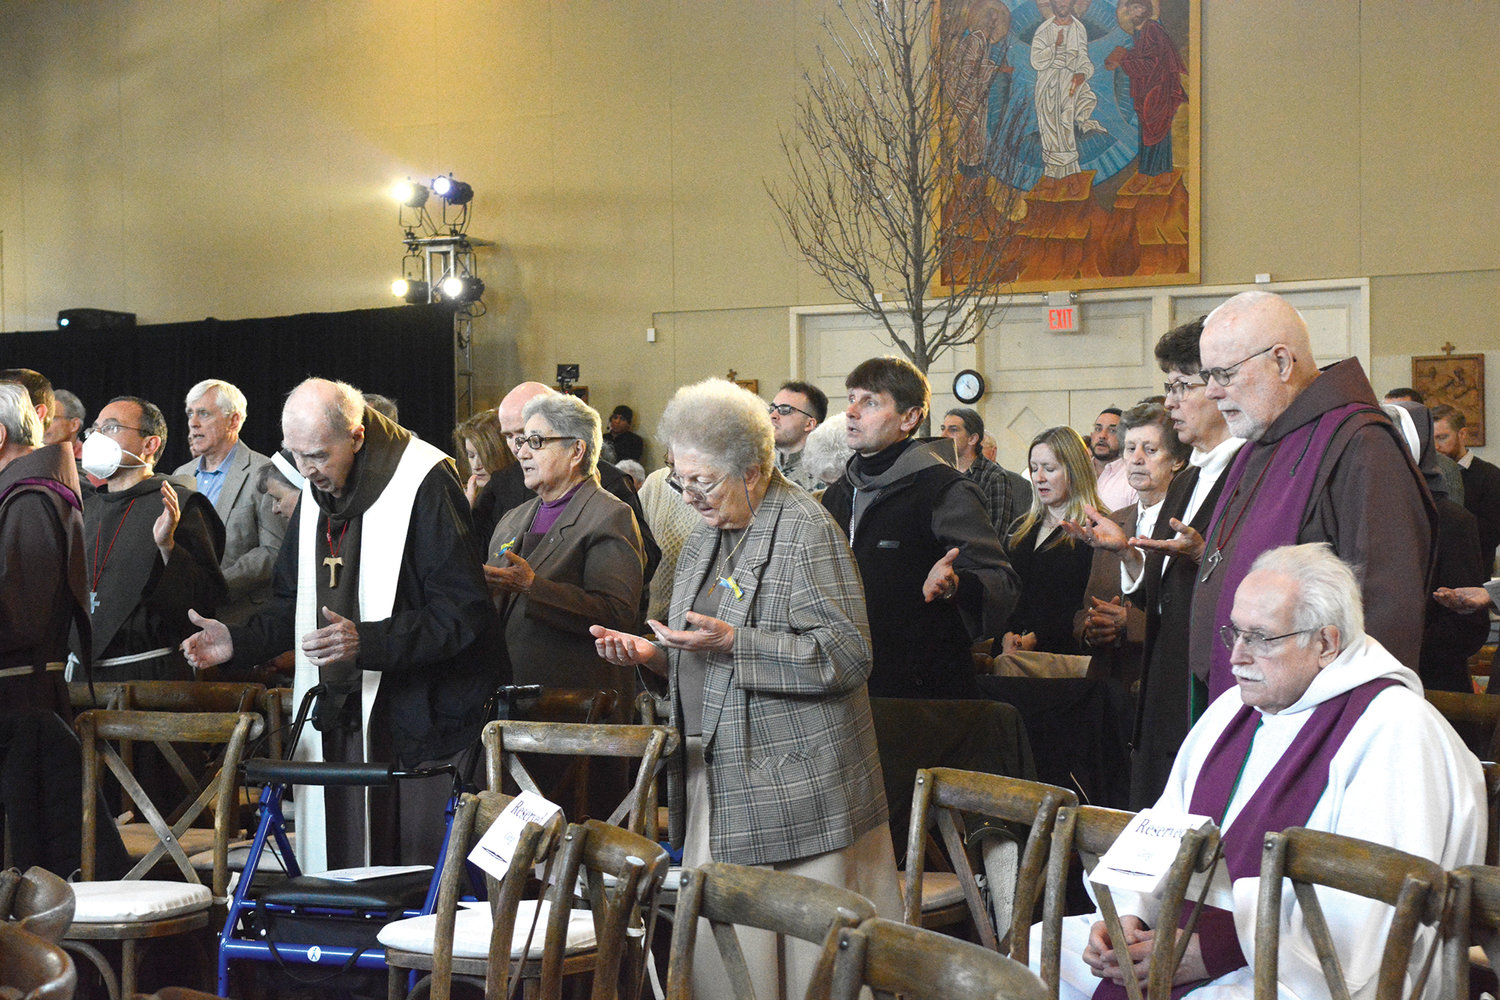 The friars and Franciscan Sisters of the Atonement pray at the Mass.